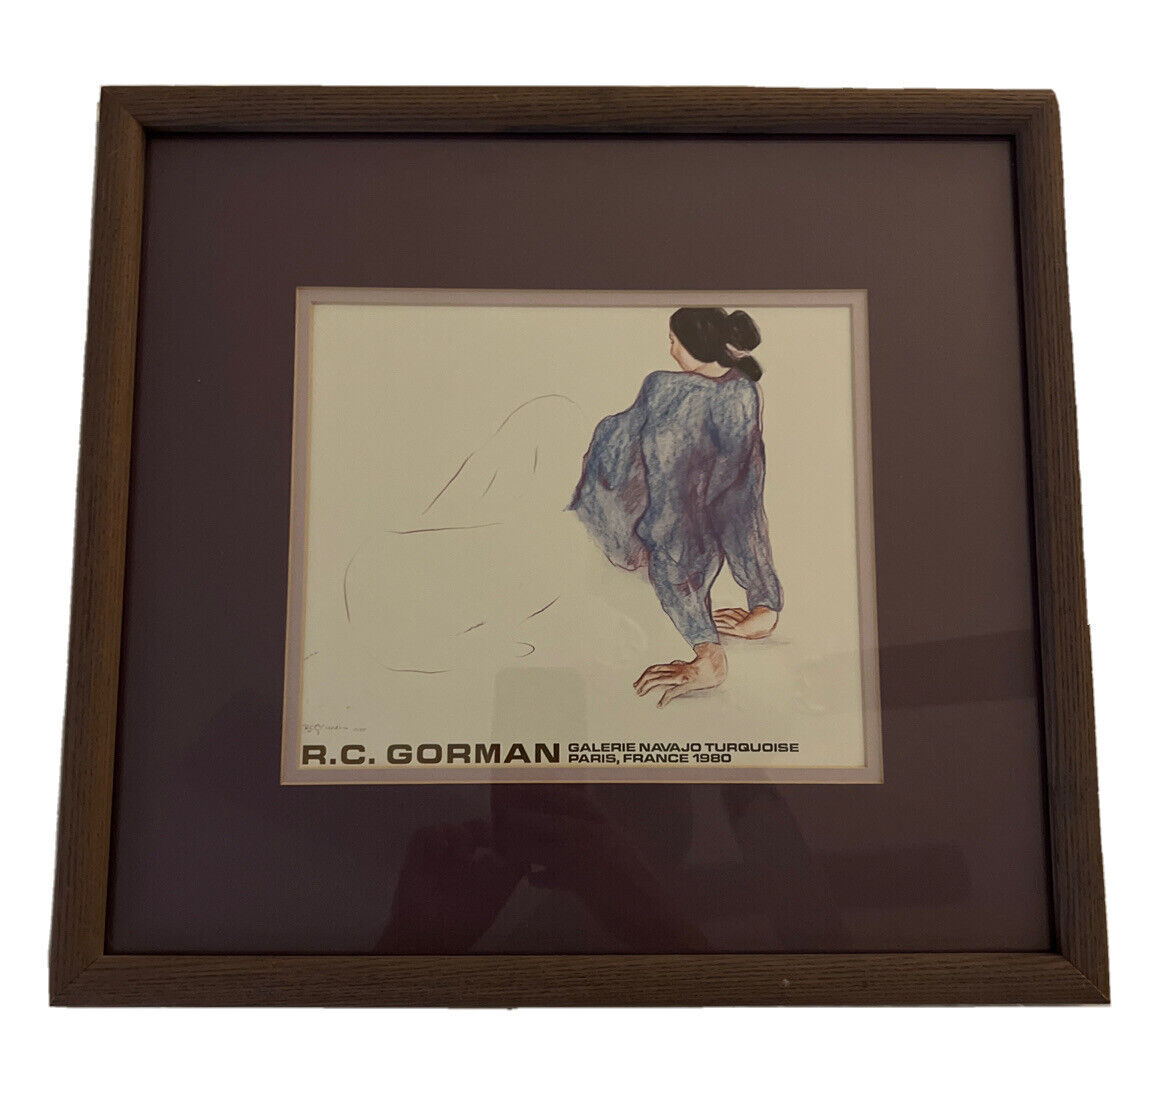 Vintage R.C. Gorman Navajo Turquoise Print Signed and Dated 1980 Framed purple